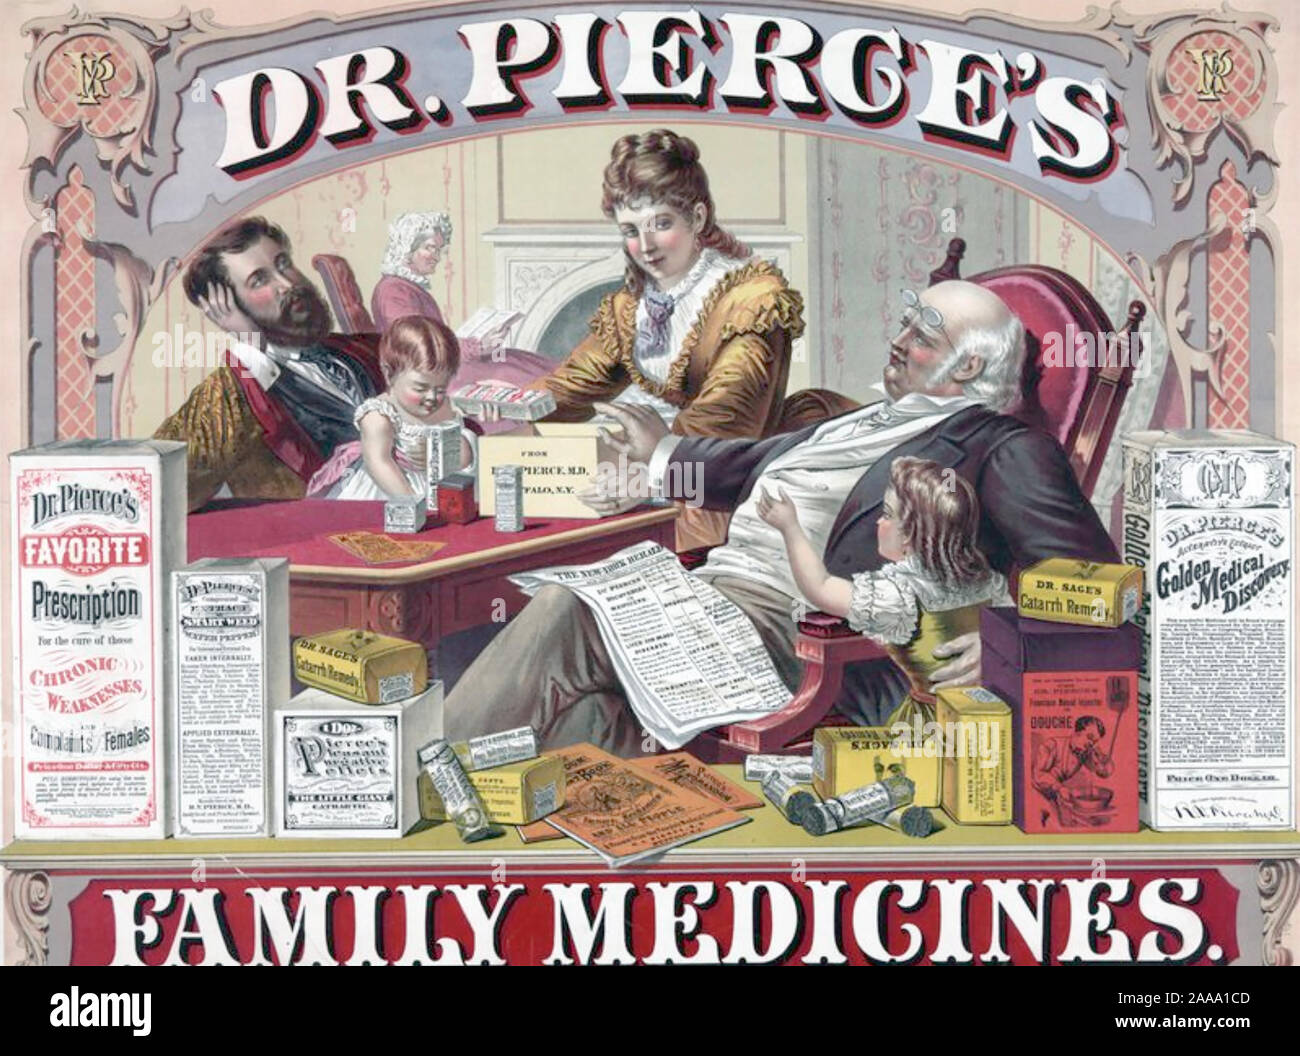 AM,ERICAN QUACK MEDICINE poster about 1895 Stock Photo